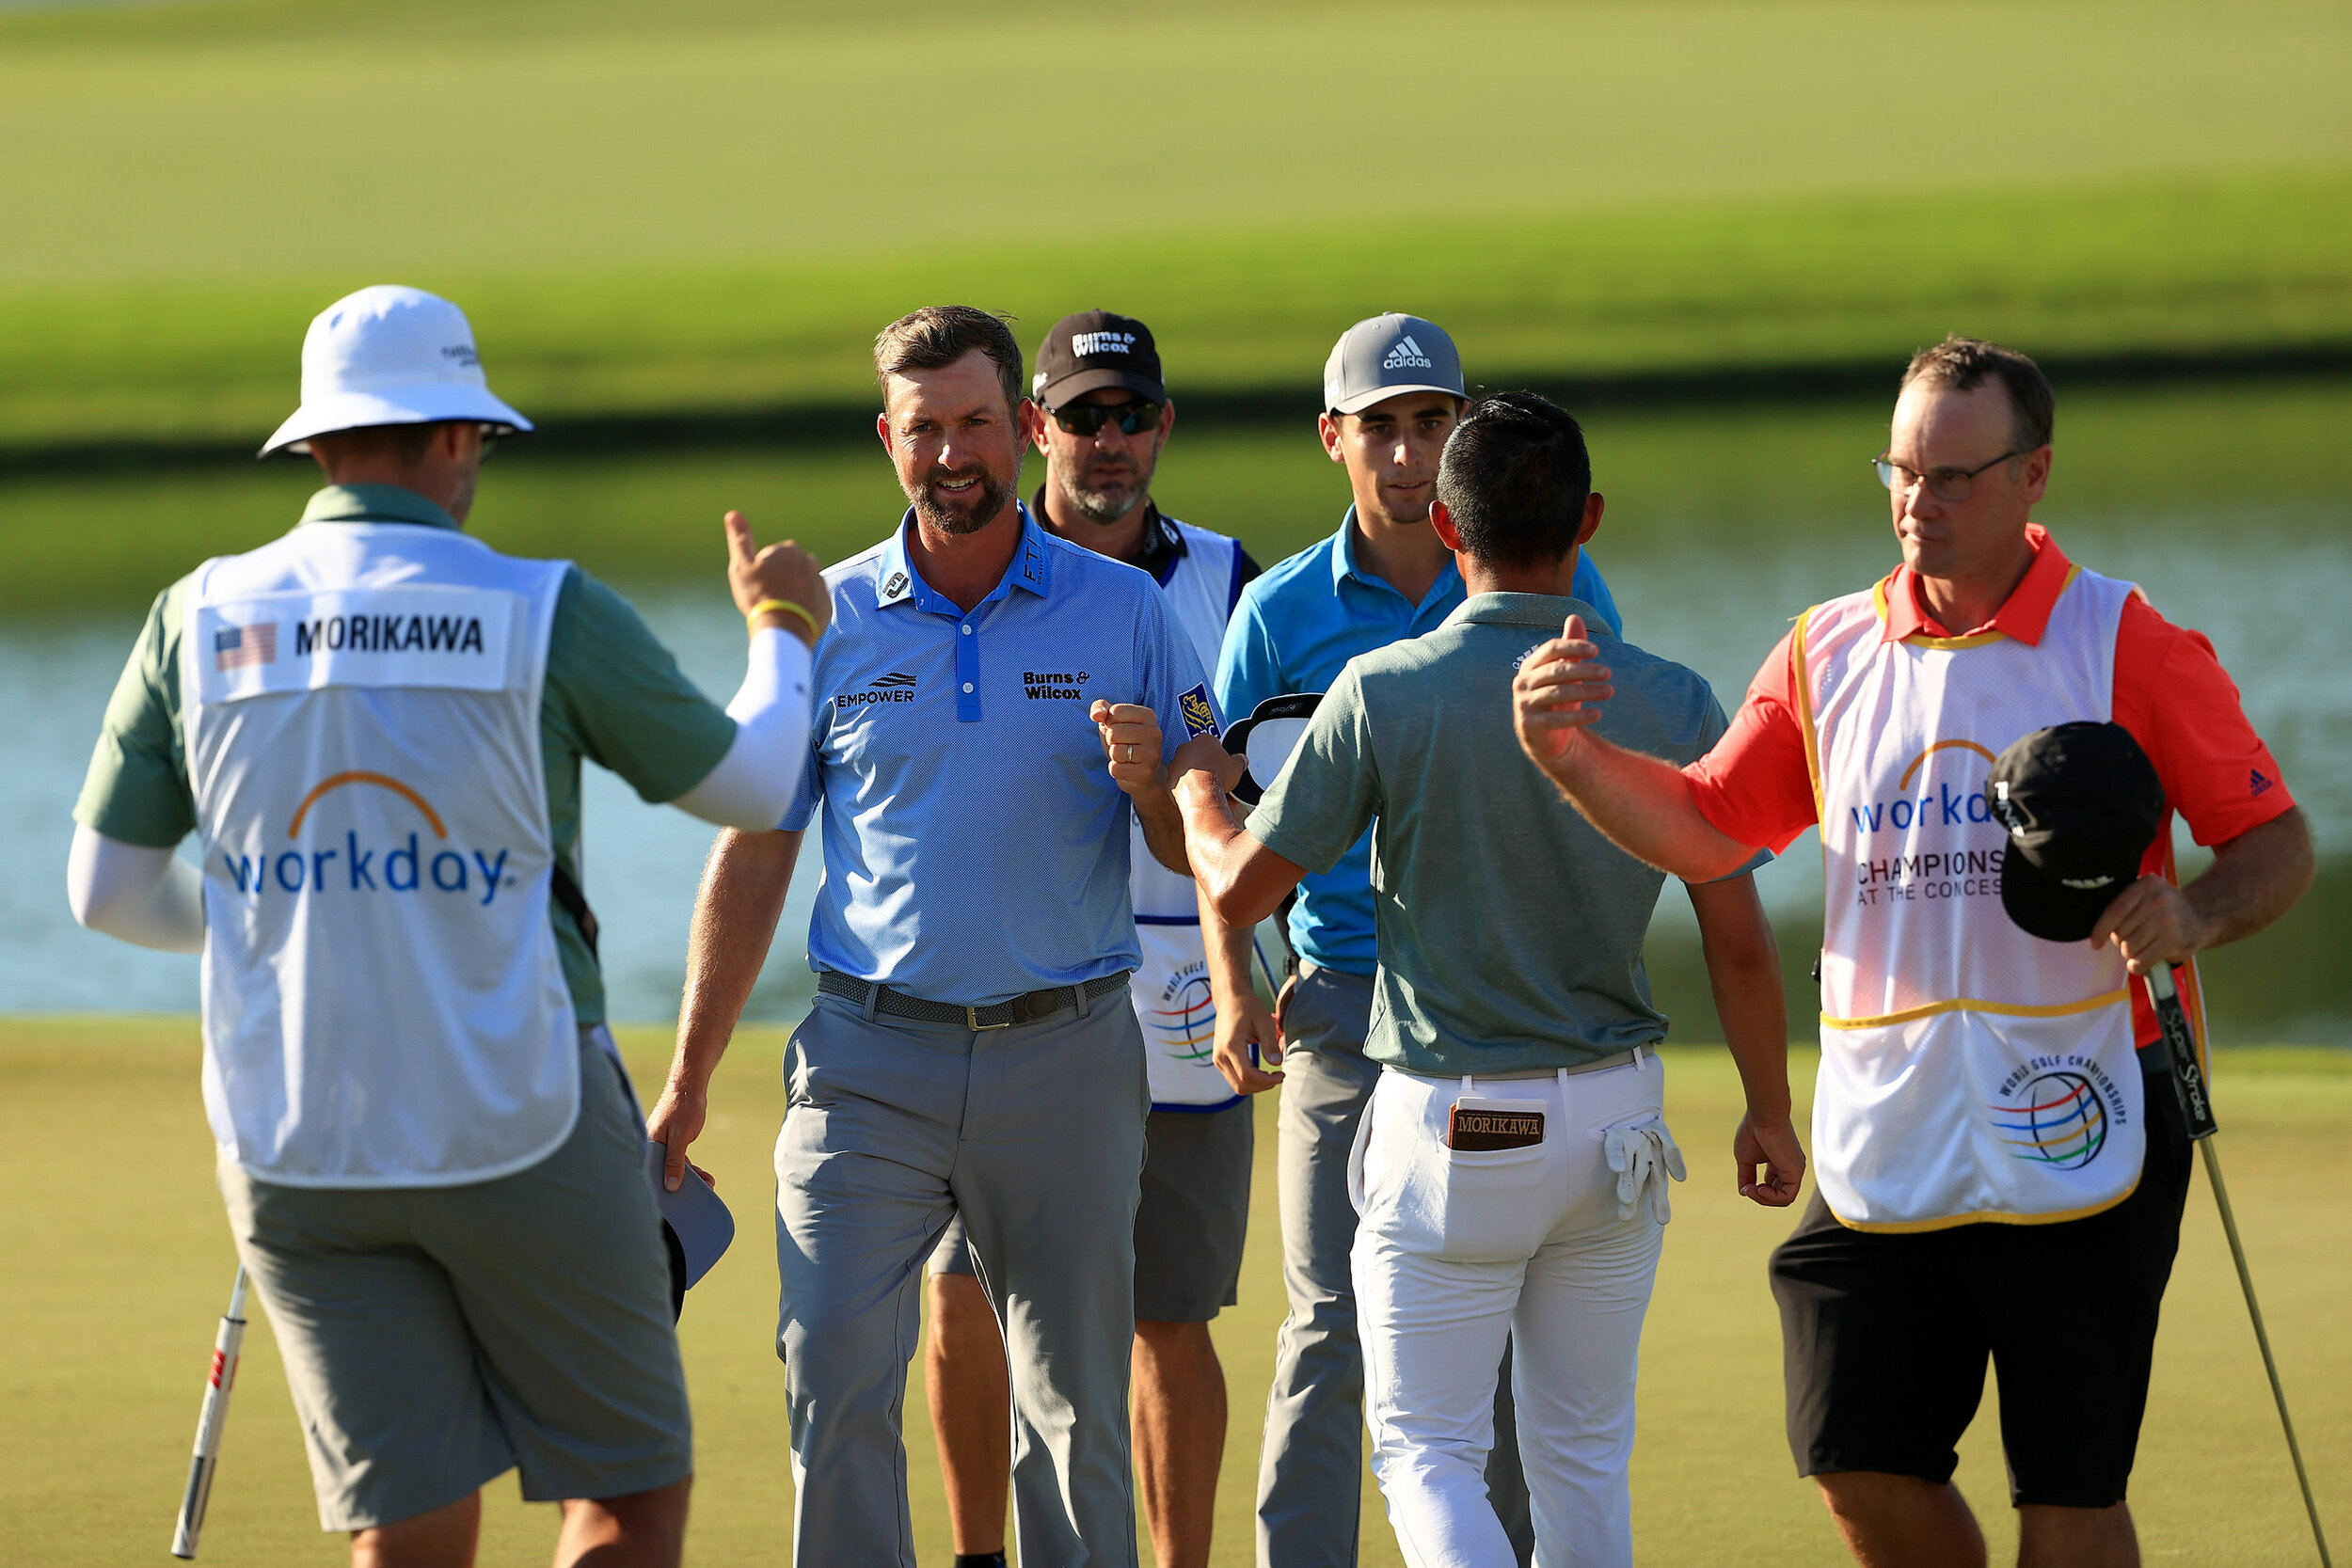  BRADENTON, FLORIDA - FEBRUARY 25: Webb Simpson of the United States and group shake hands on the 18th green after their first round of World Golf Championships-Workday Championship at The Concession on February 25, 2021 in Bradenton, Florida. (Photo